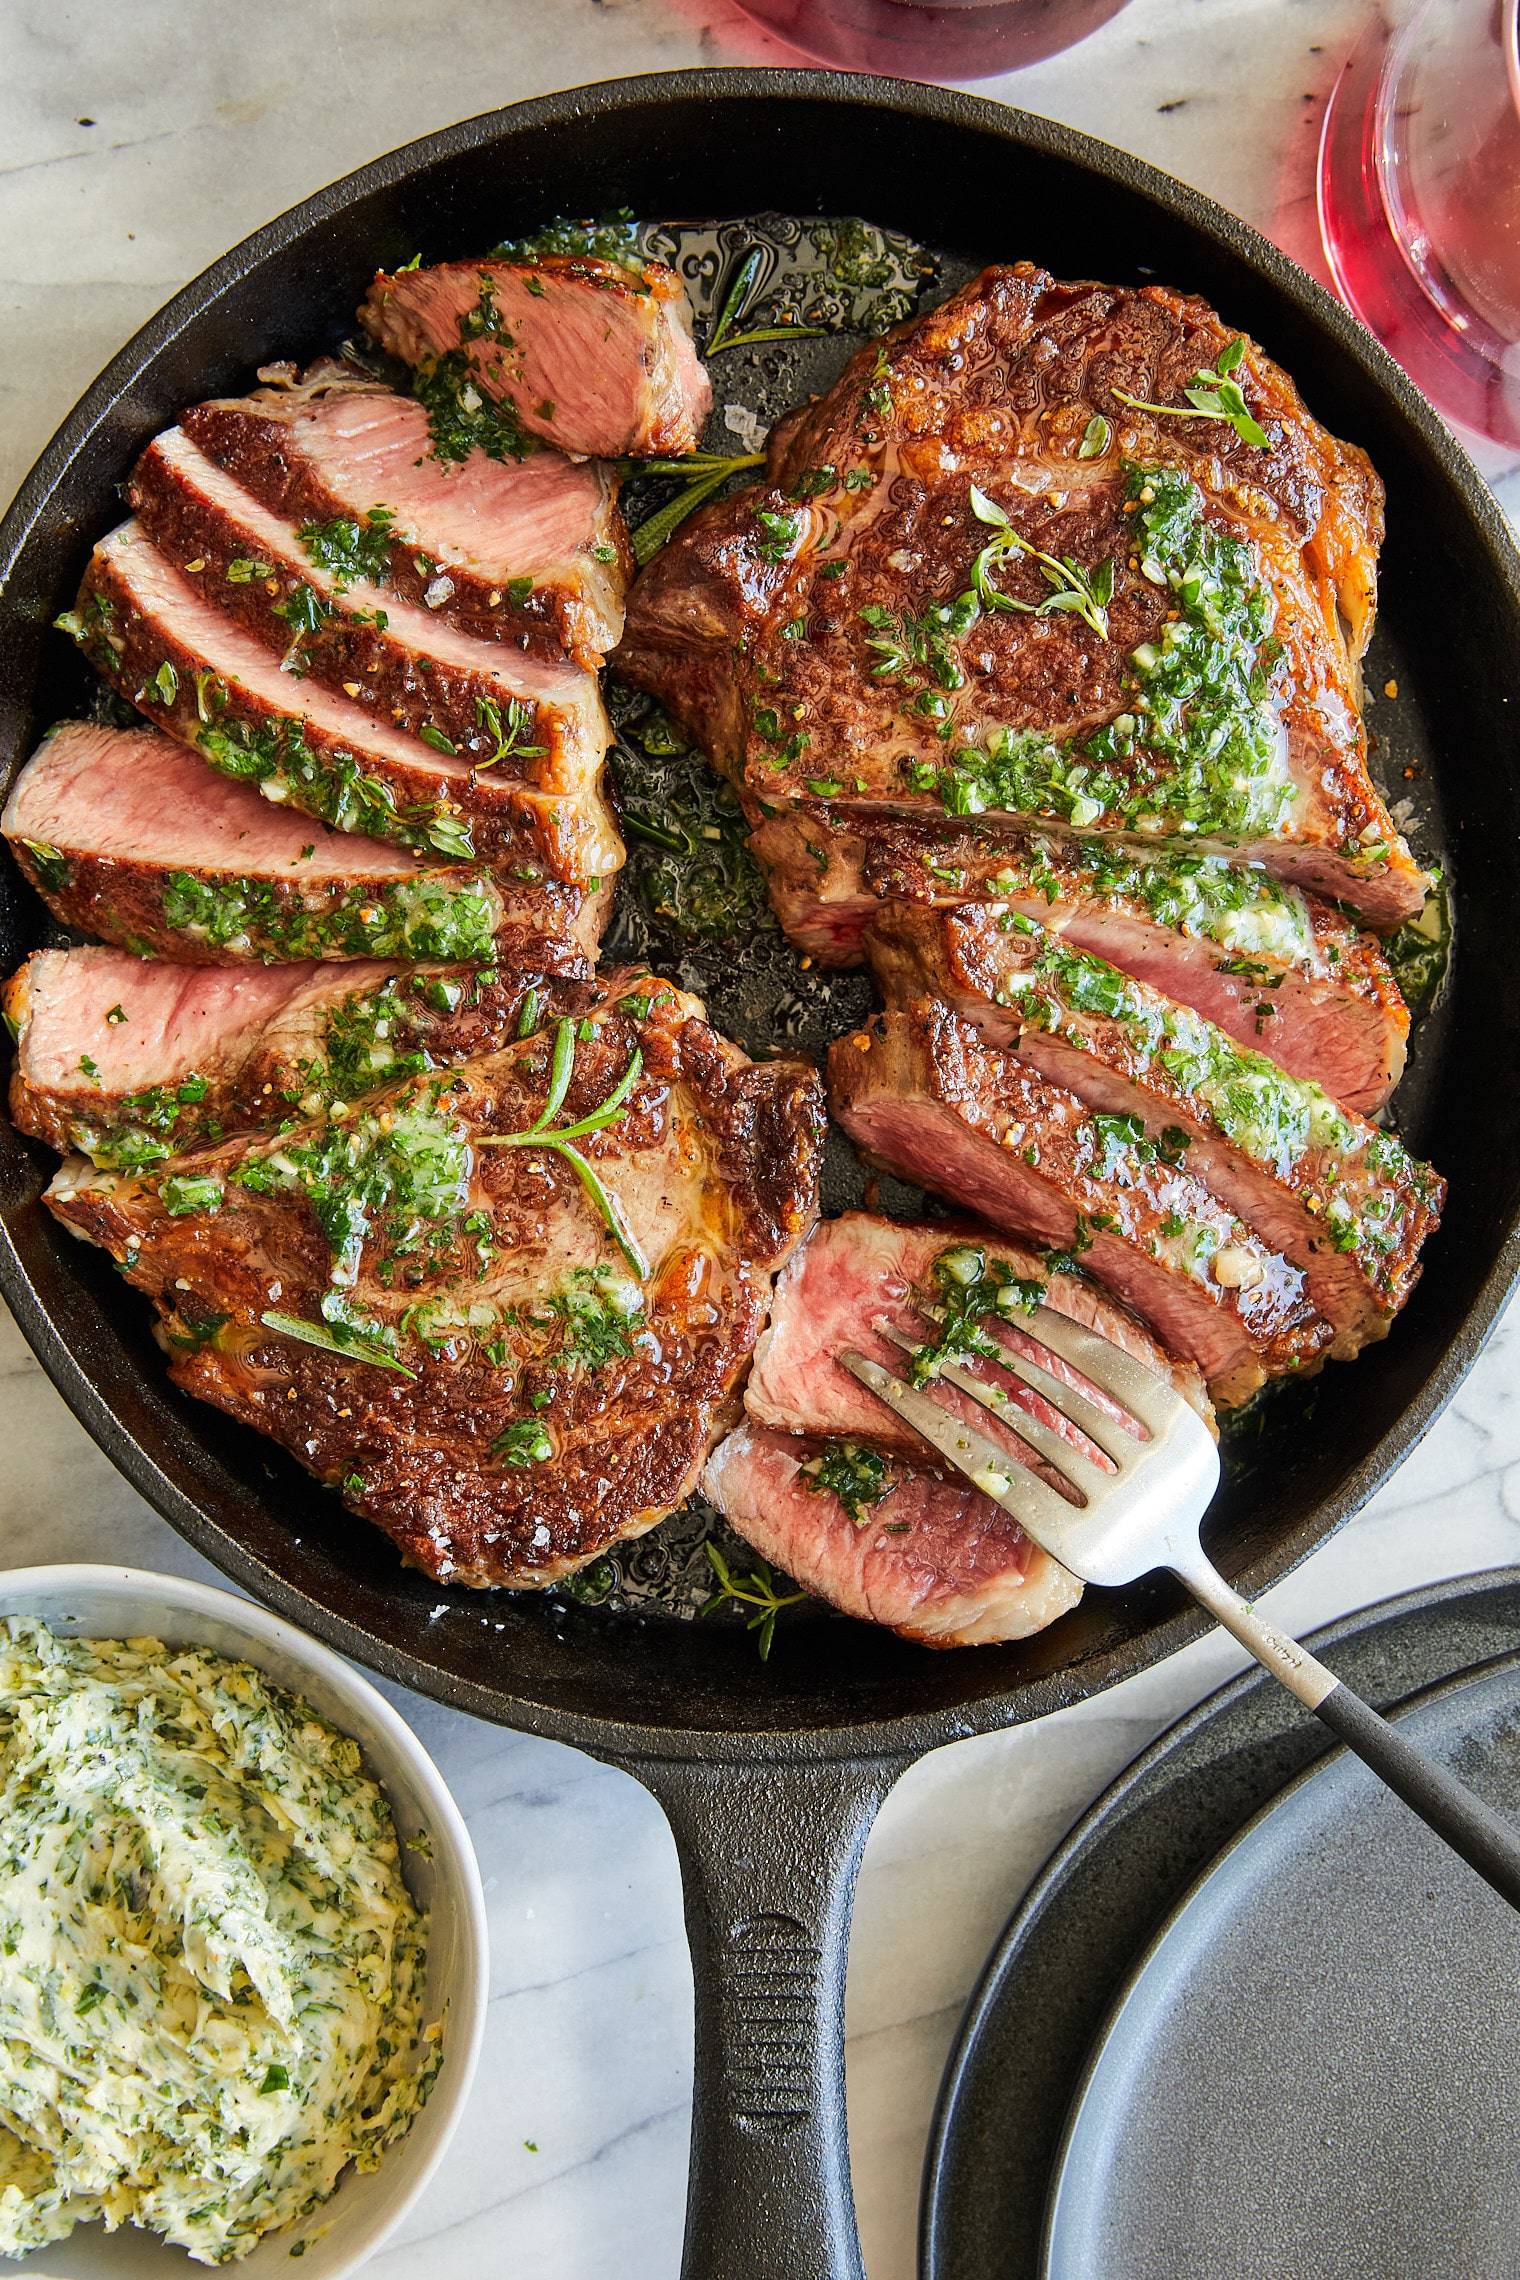 https://s23209.pcdn.co/wp-content/uploads/2016/06/The-Perfect-Steak-with-Garlic-Butter_121.jpg